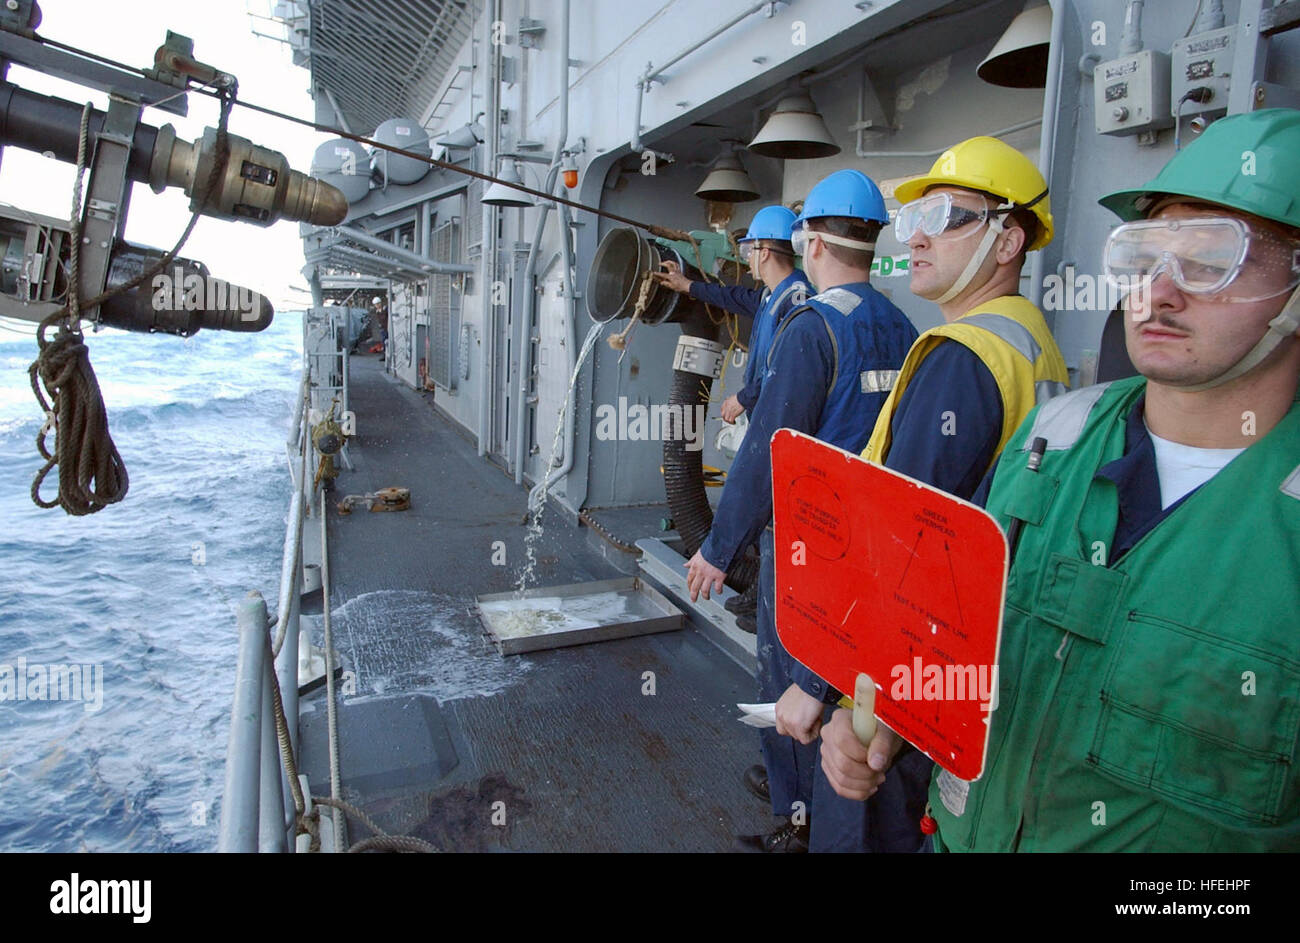 030329-N-3235P-505 Central Command Area of Responsibility (Mar. 29, 2003) --Crewmembers assigned to Refueling Station Seven aboard the guided missile cruiser USS Cape St. George (CG 71) give the signal to disengage the refueling probe during an underway replenishment (UNREP) with the Military Sealift Command fast combat support ship USNS Arctic (T-AOE 8).  Cape St. George and Arctic are deployed in support of Operation Iraqi Freedom, the multi-national coalition effort to liberate the Iraqi people, eliminate Iraq's weapons of mass destruction, and end the regime of Saddam Hussein.  U.S. Navy p Stock Photo